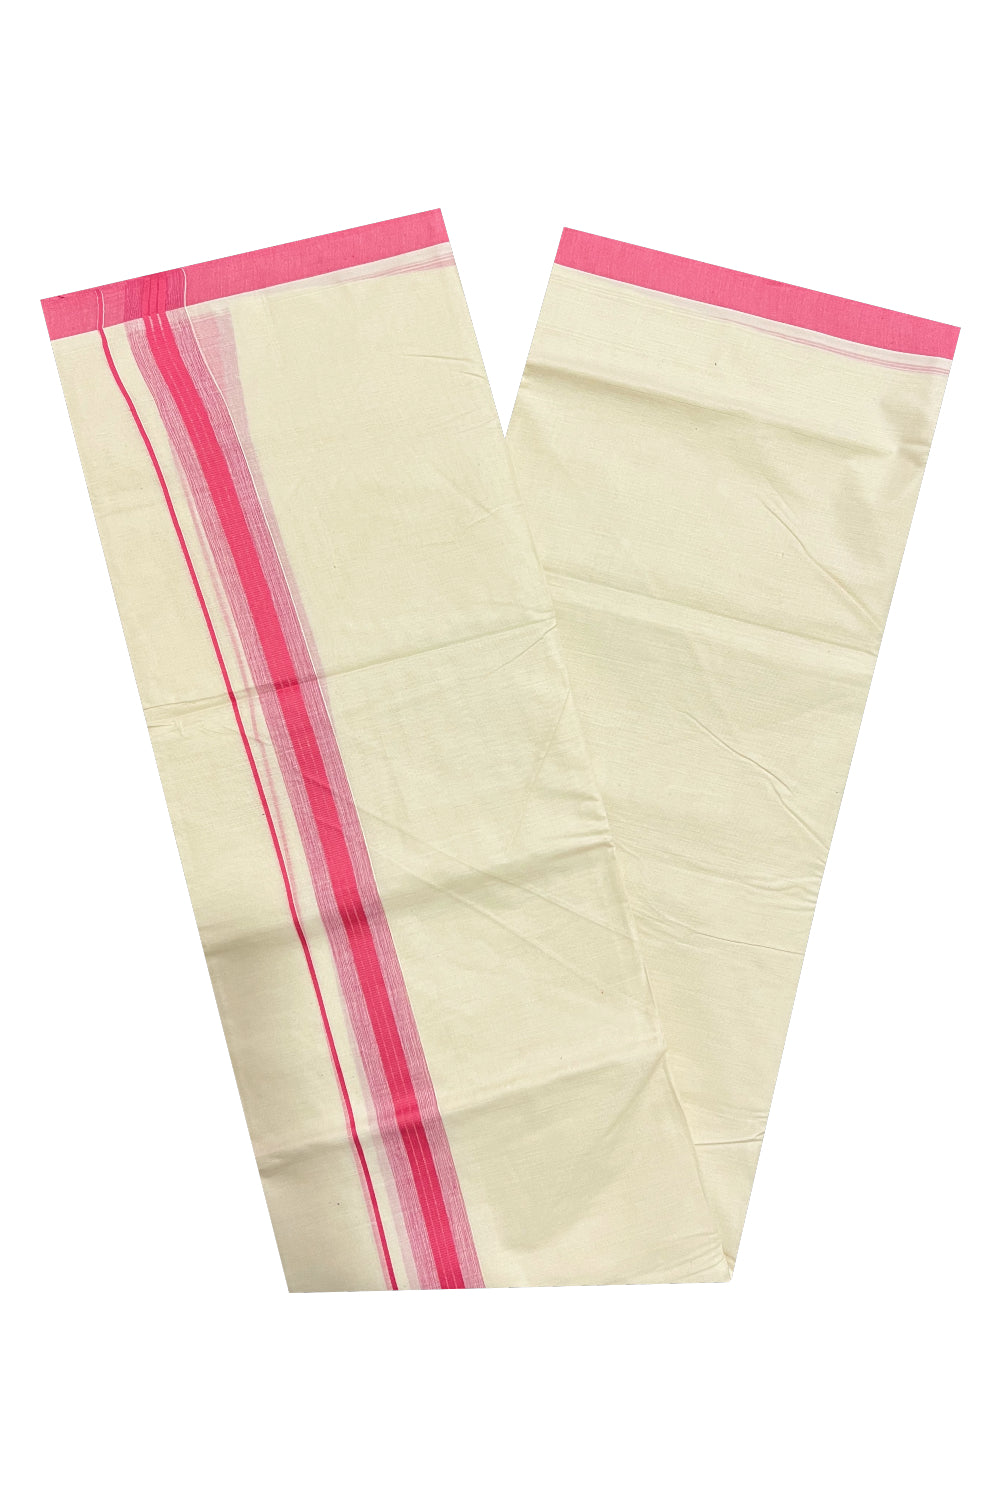 Pure Cotton Off White Double Mundu with Pink Border (South Indian Dhoti)